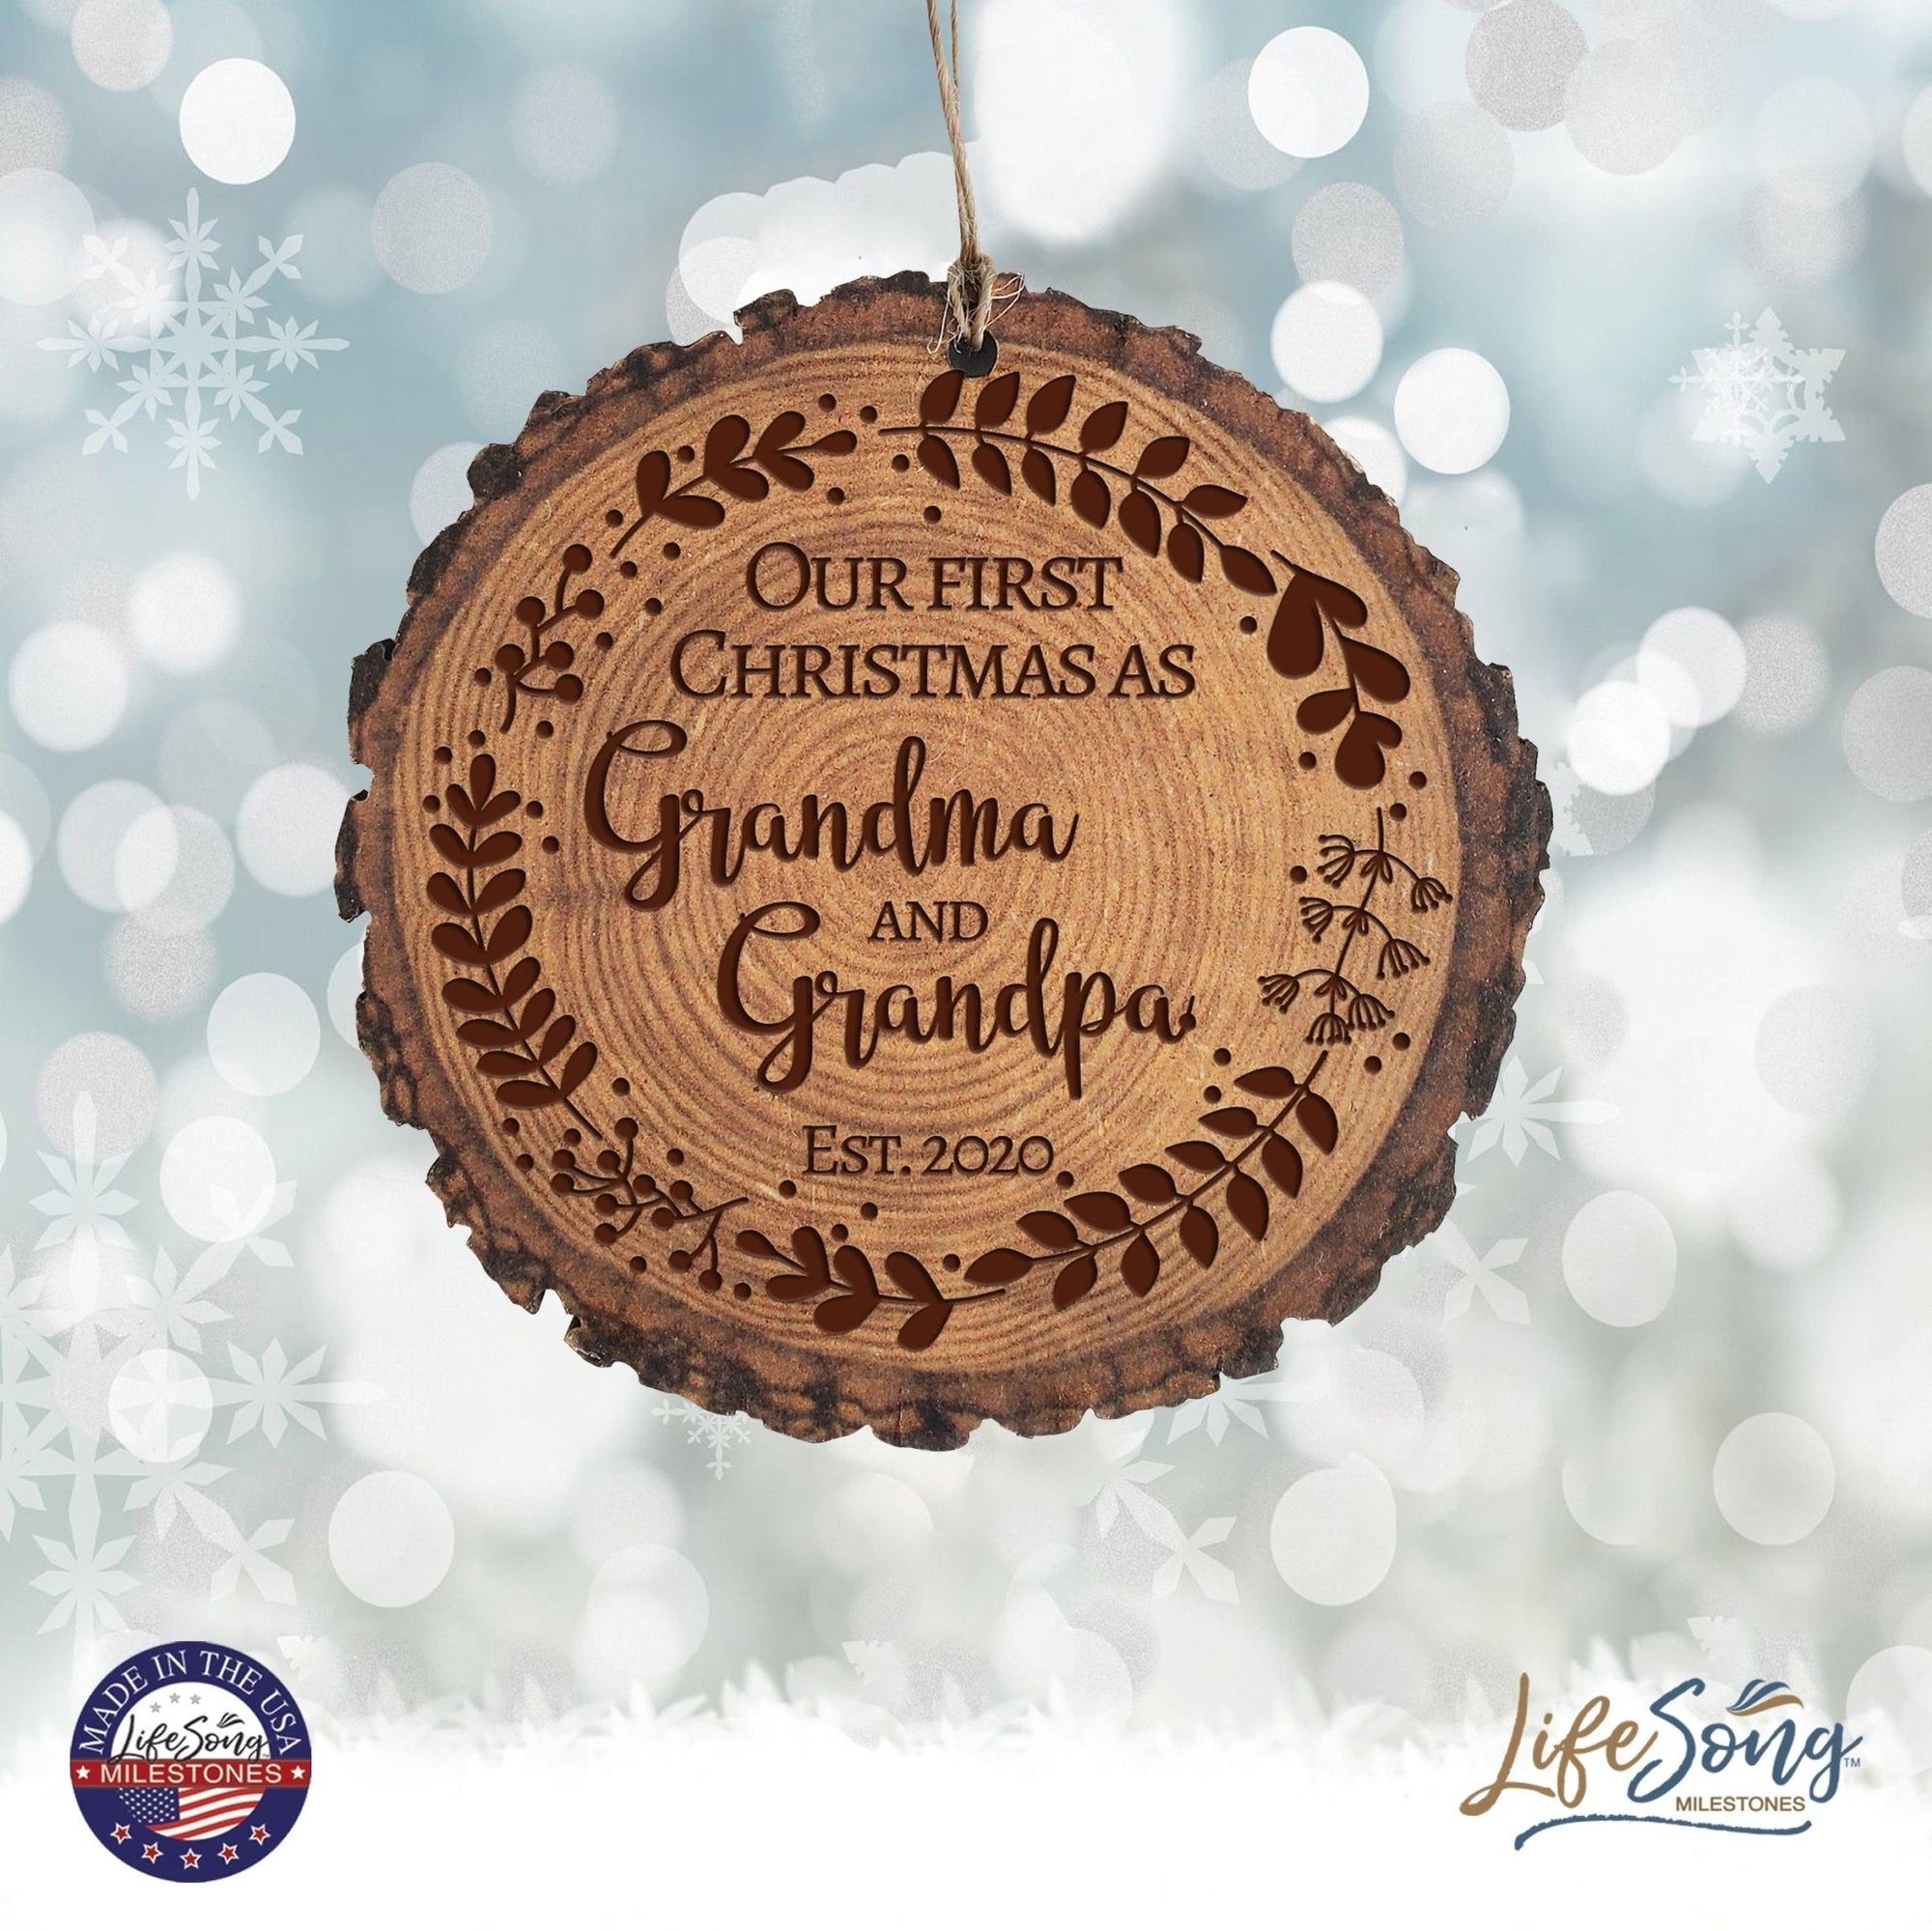 Personalized 3.75in Christmas Barky Ornament for Grandparents - Our First Christmas - LifeSong Milestones